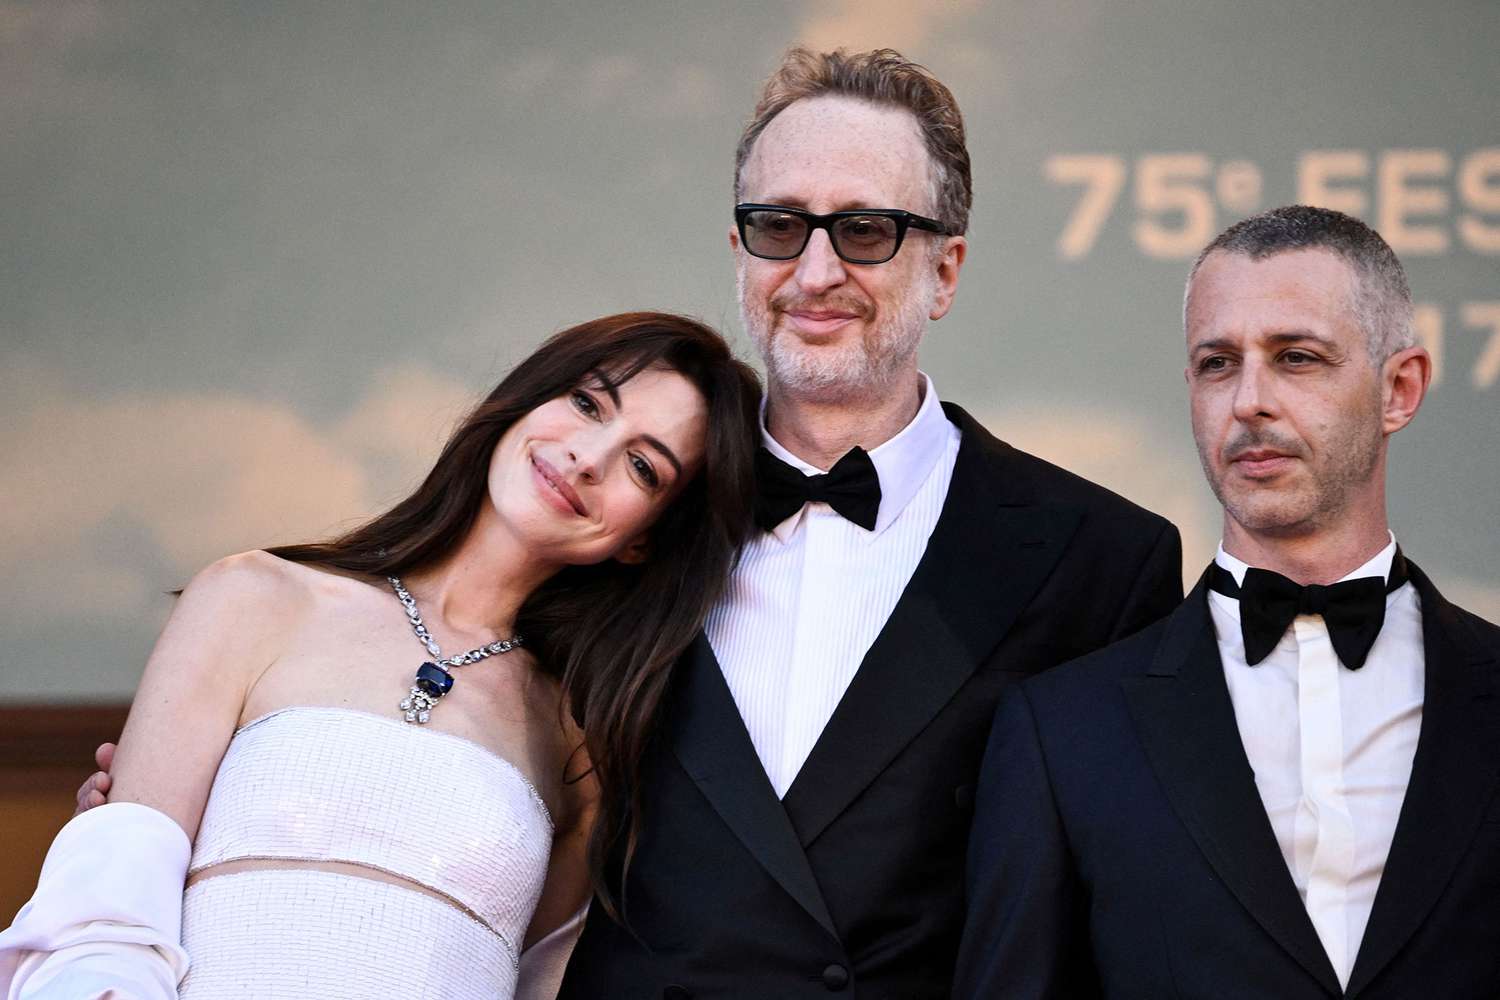 US actress Anne Hathaway, US director James Gray and US actor Jeremy Strong arrive for the screening of the film "Armageddon Time" during the 75th edition of the Cannes Film Festival in Cannes, southern France, on May 19, 2022.